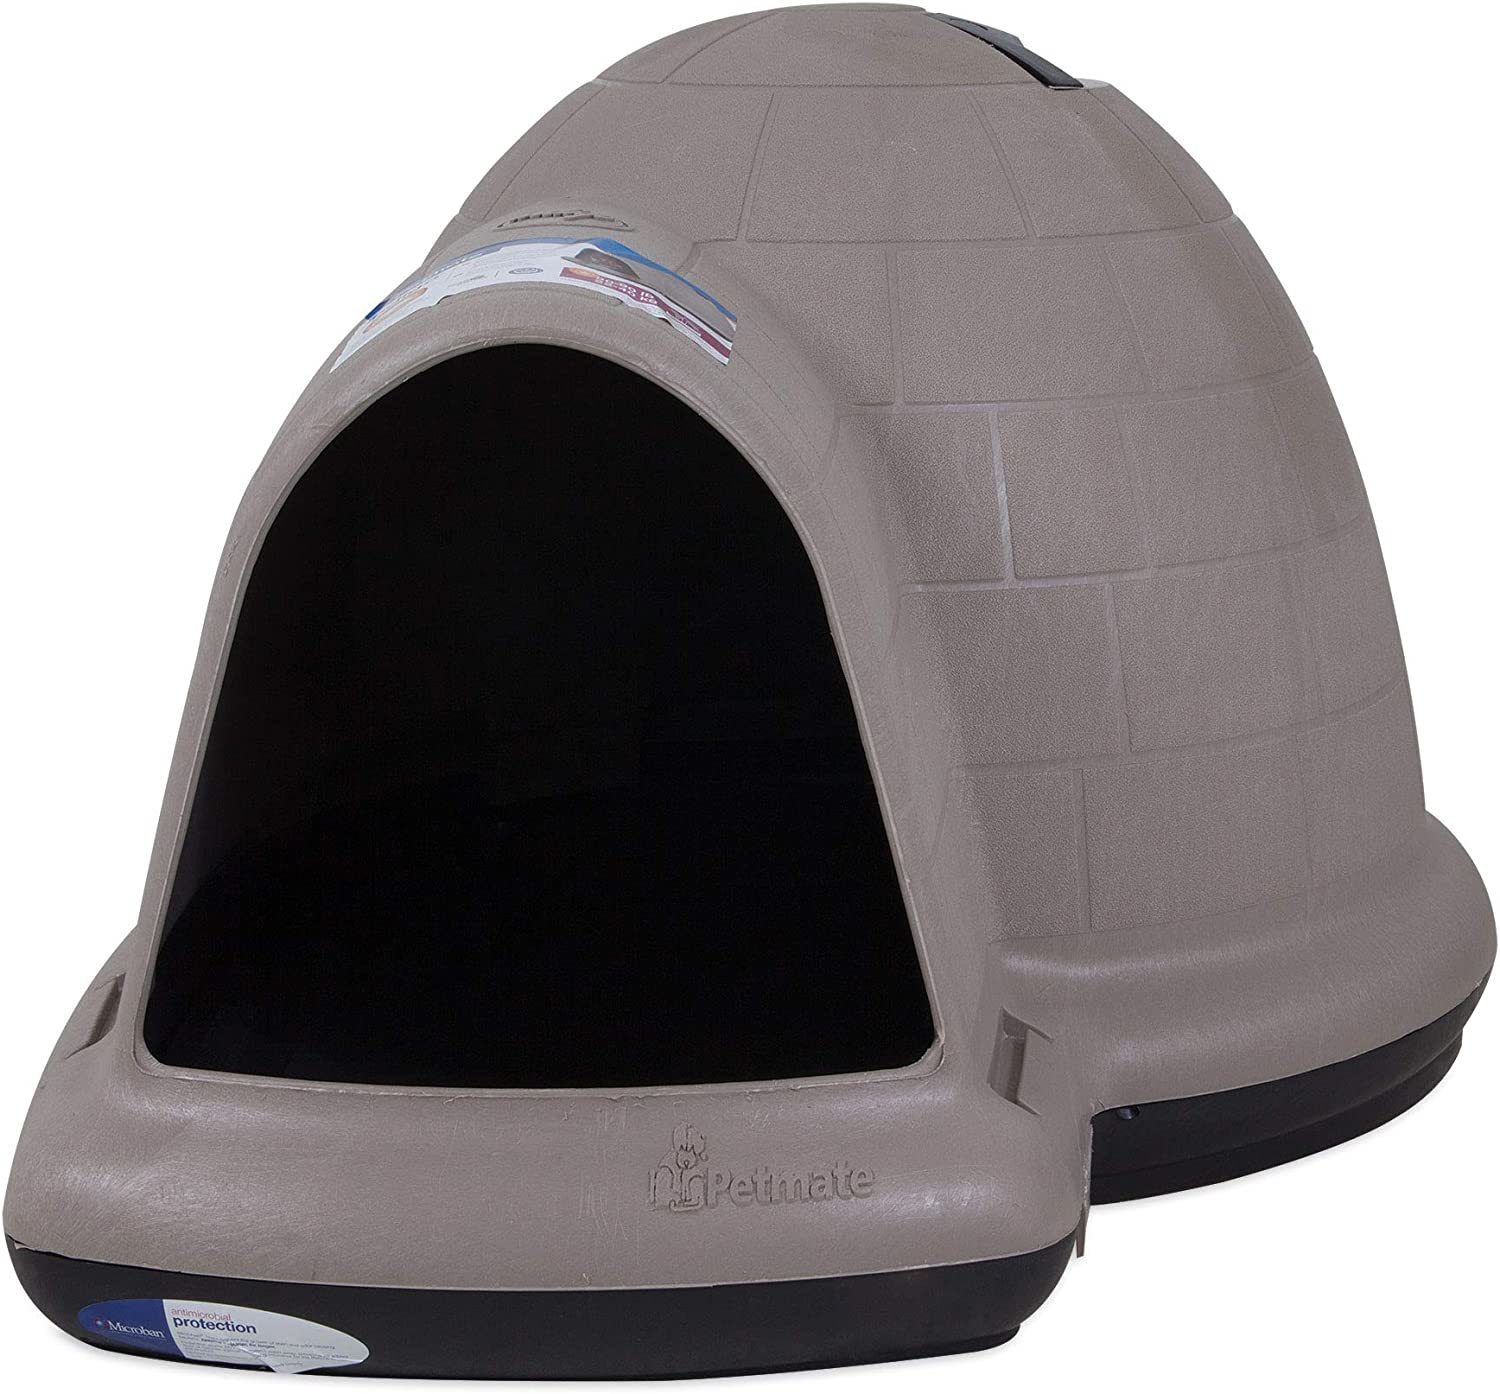 Dog House (Igloo Dog House, Made in USA with 90% Recycled Materia - $399.97